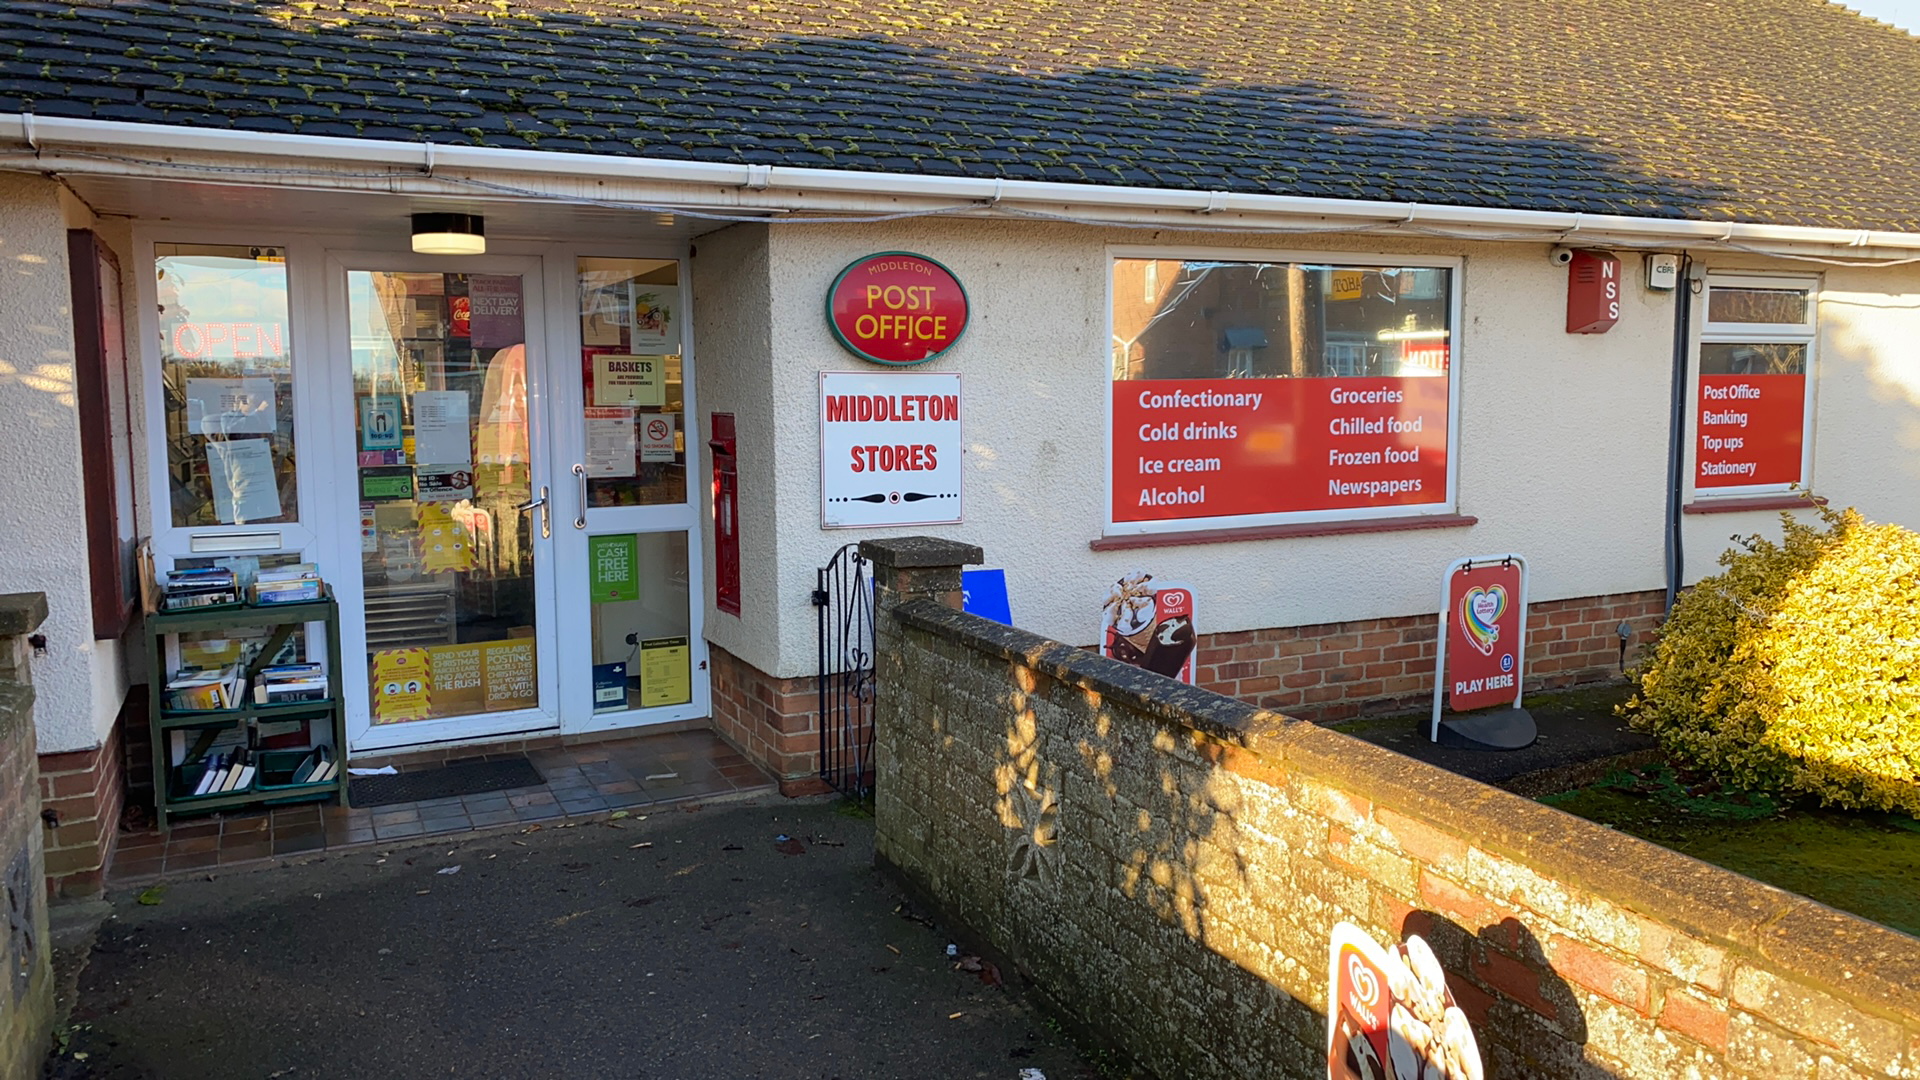 Middleton Post Office & Stores